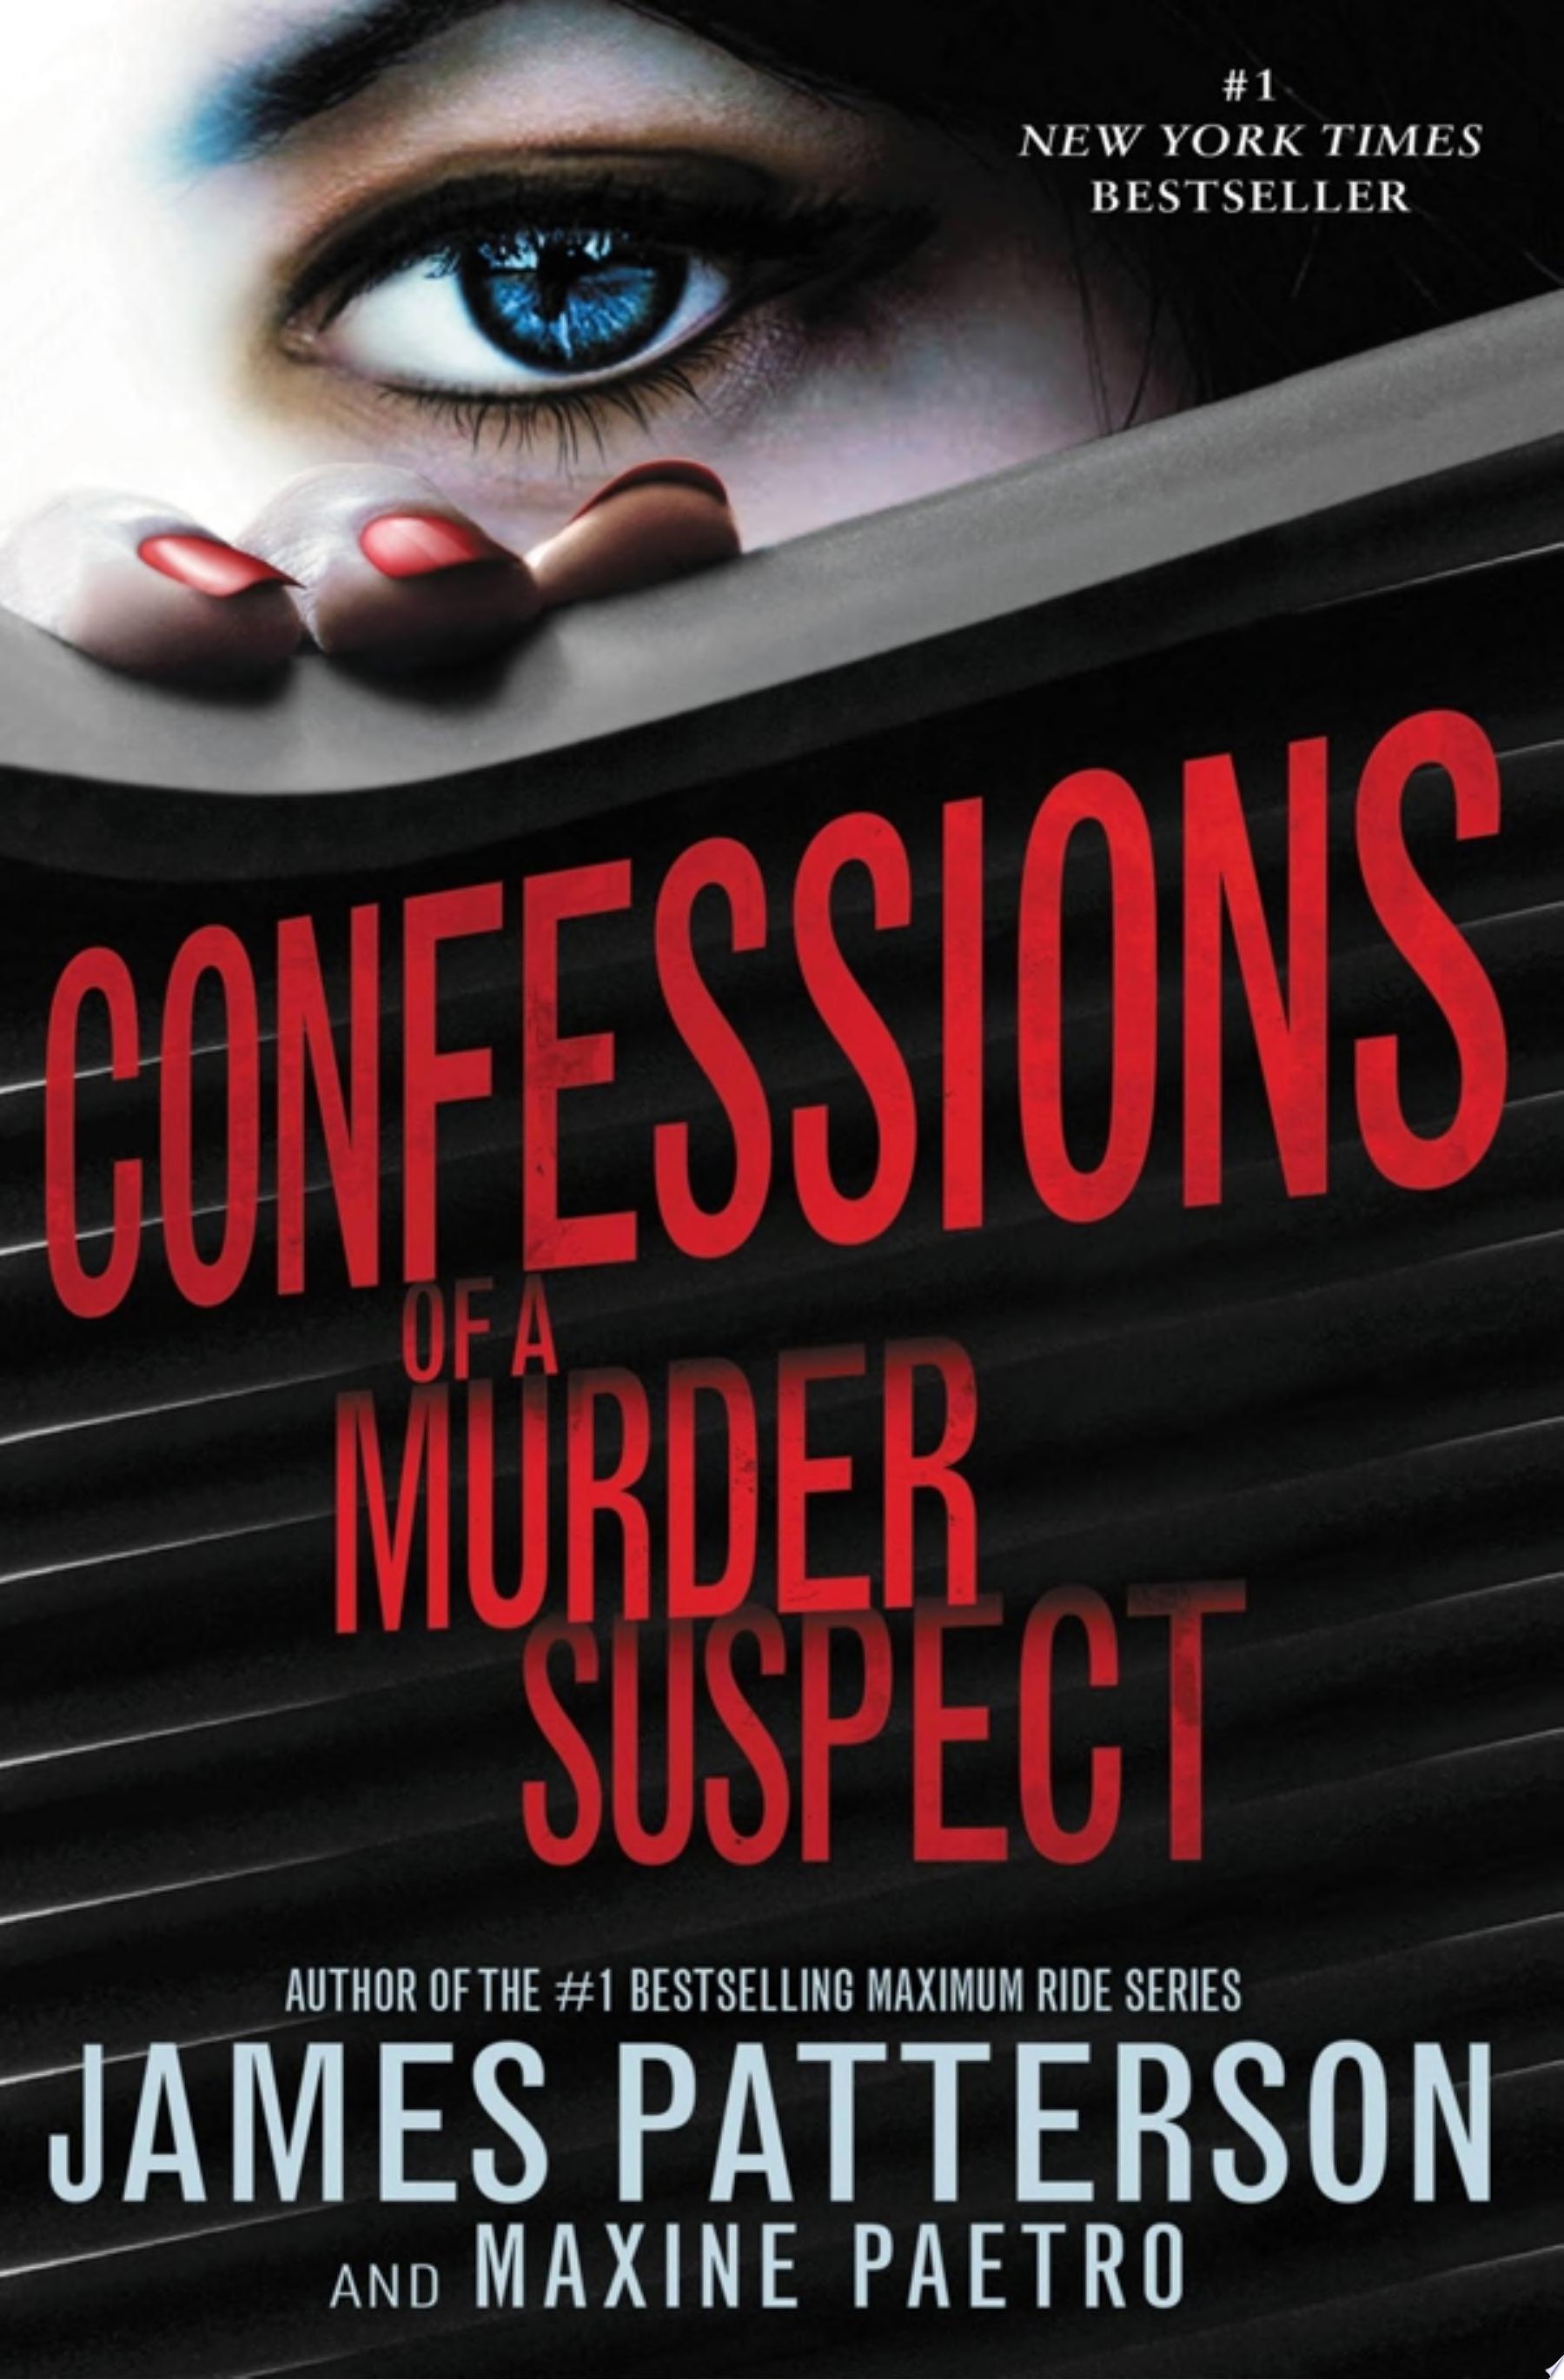 Image for "Confessions of a Murder Suspect"